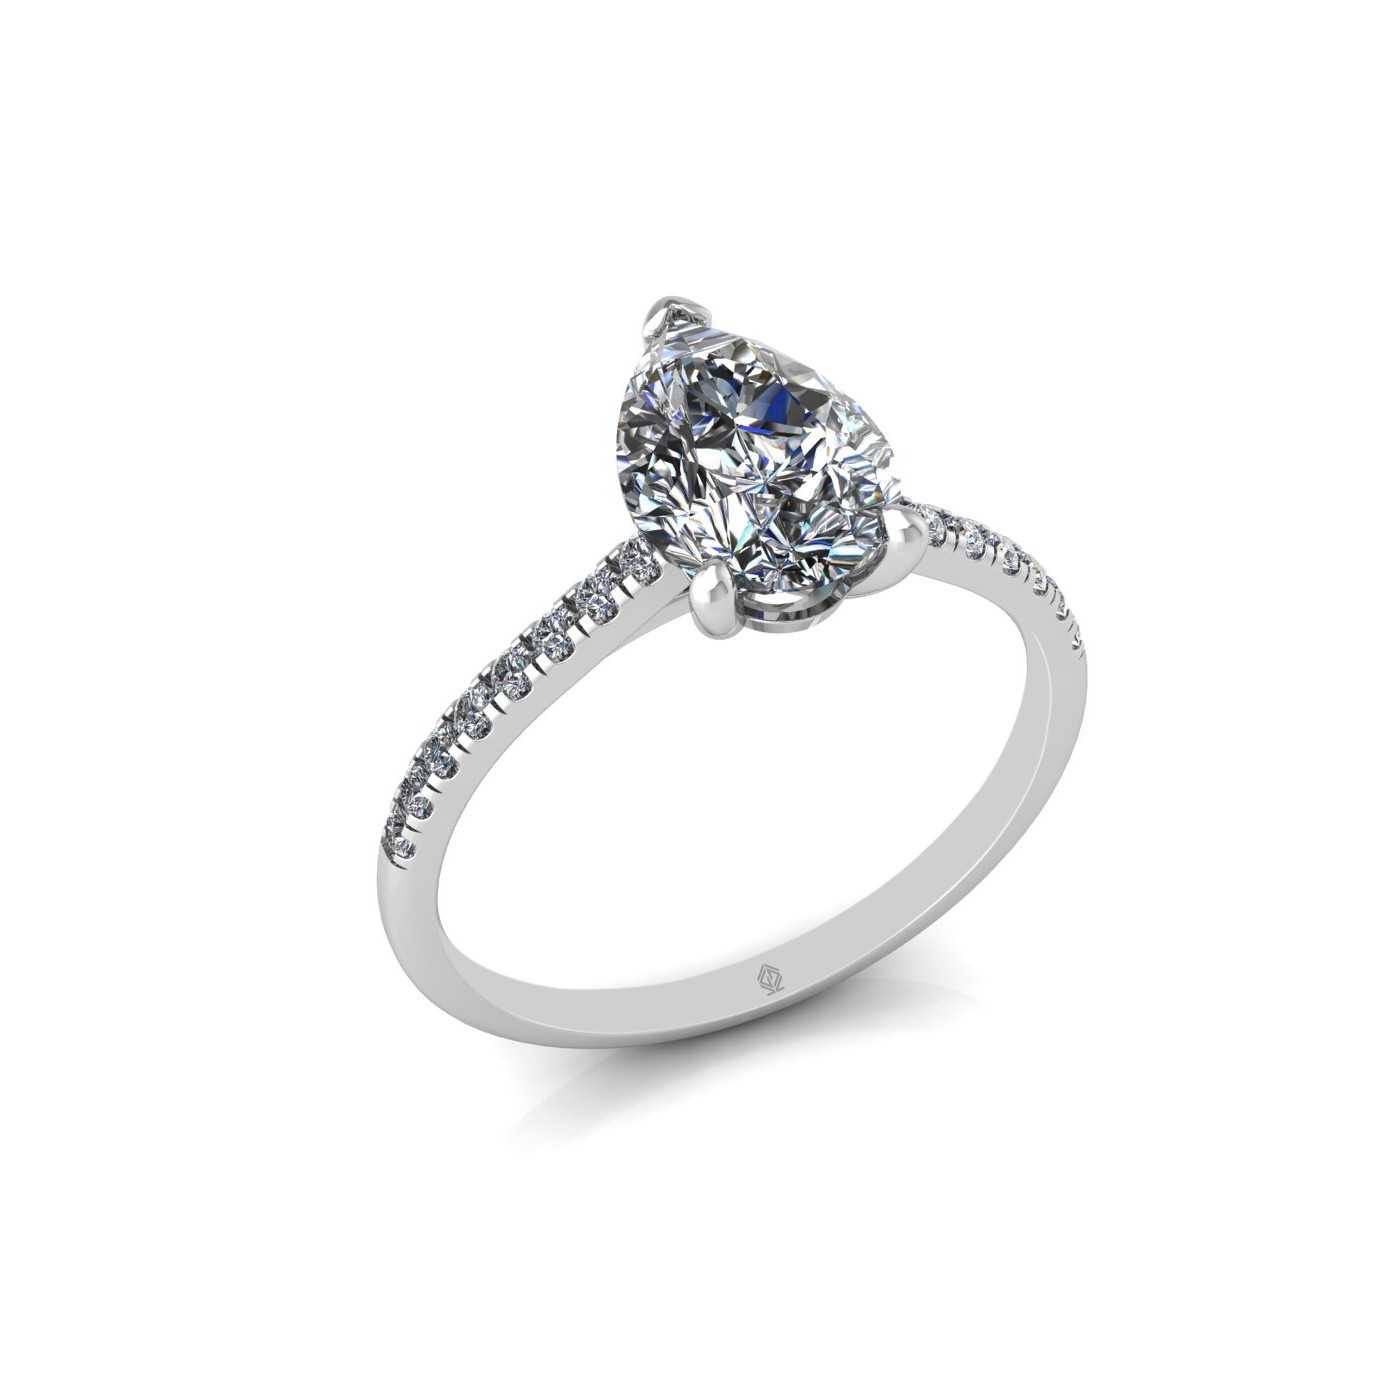 18k white gold 1,50 ct 3 prongs pear diamond engagement ring with whisper thin pavÉ set band